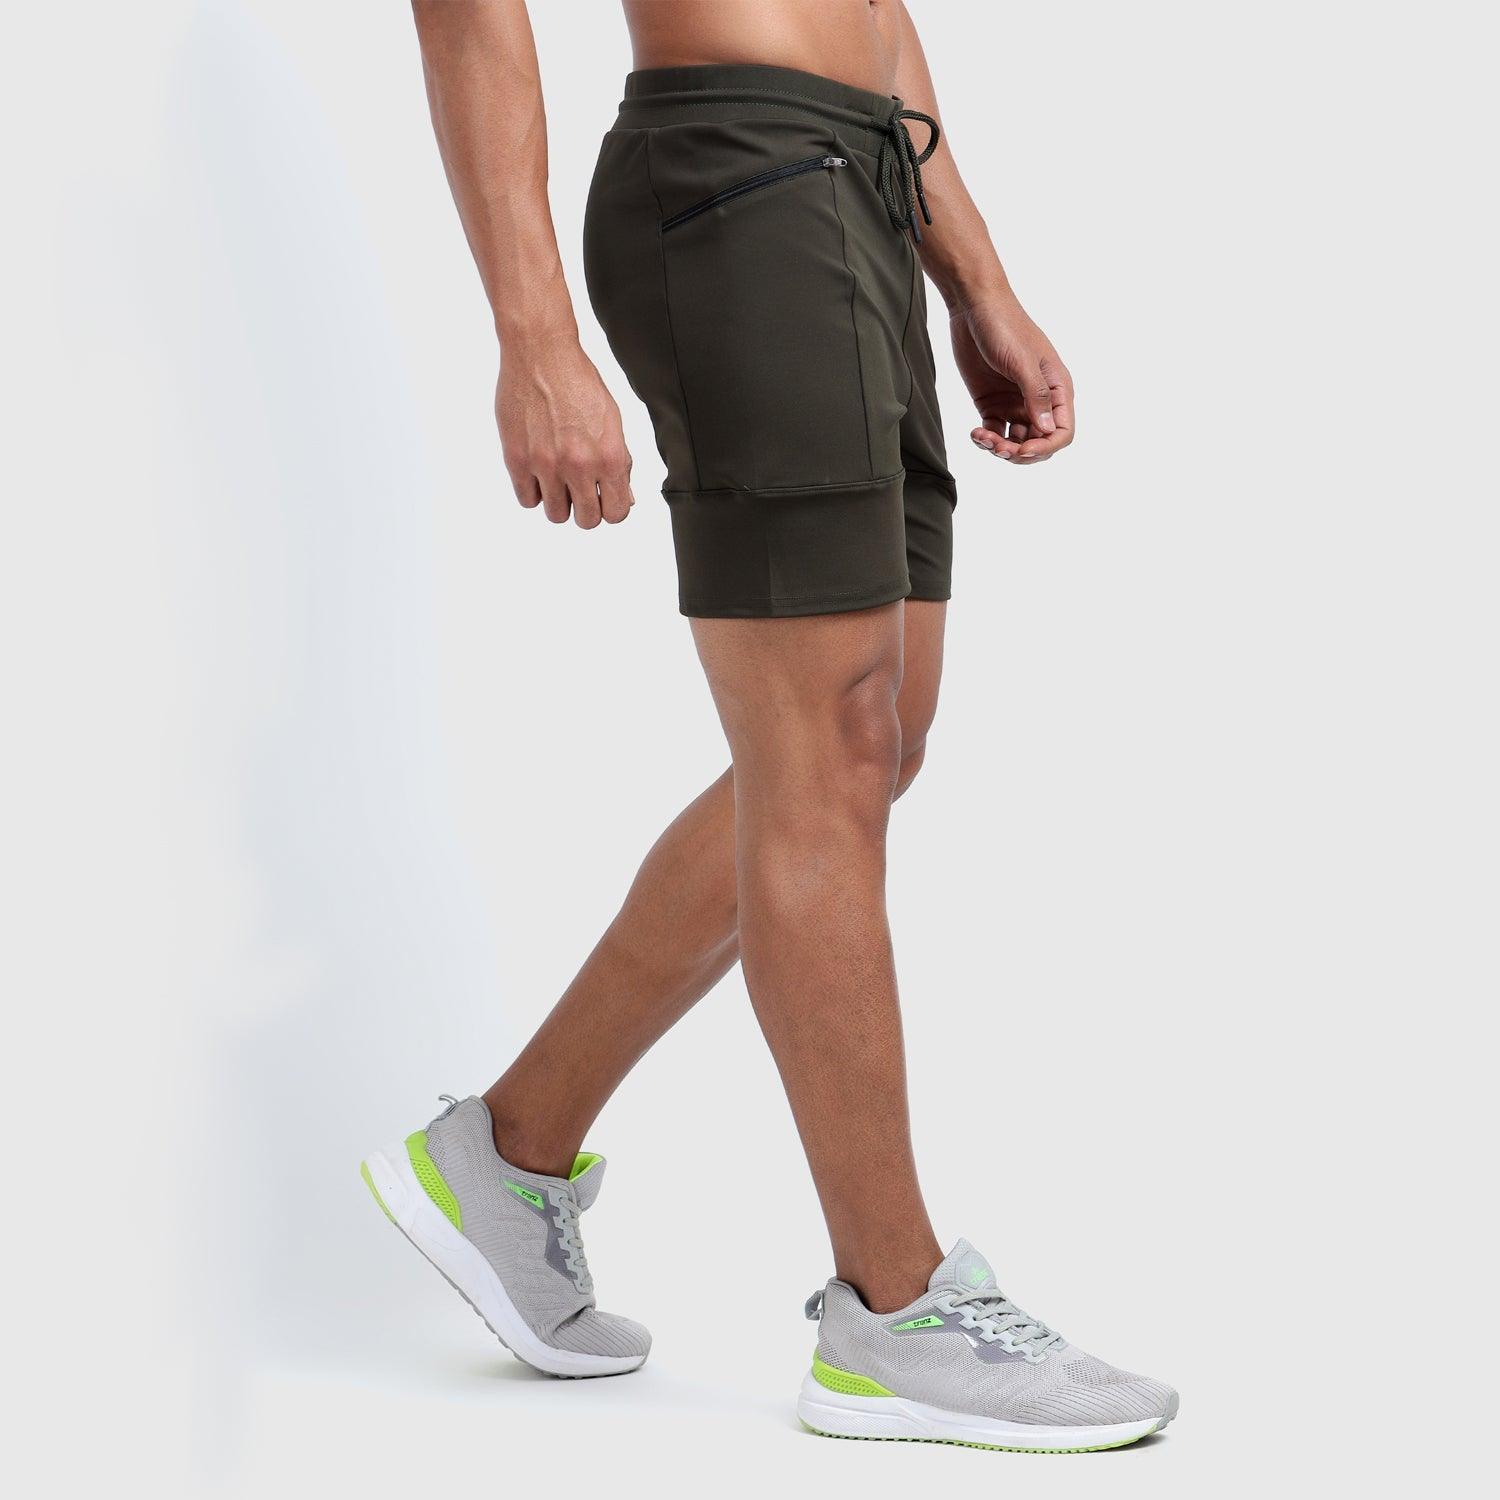 Denmonk's fashionable Power Shorts core olive shorts for men will boost your level of gym fitness.